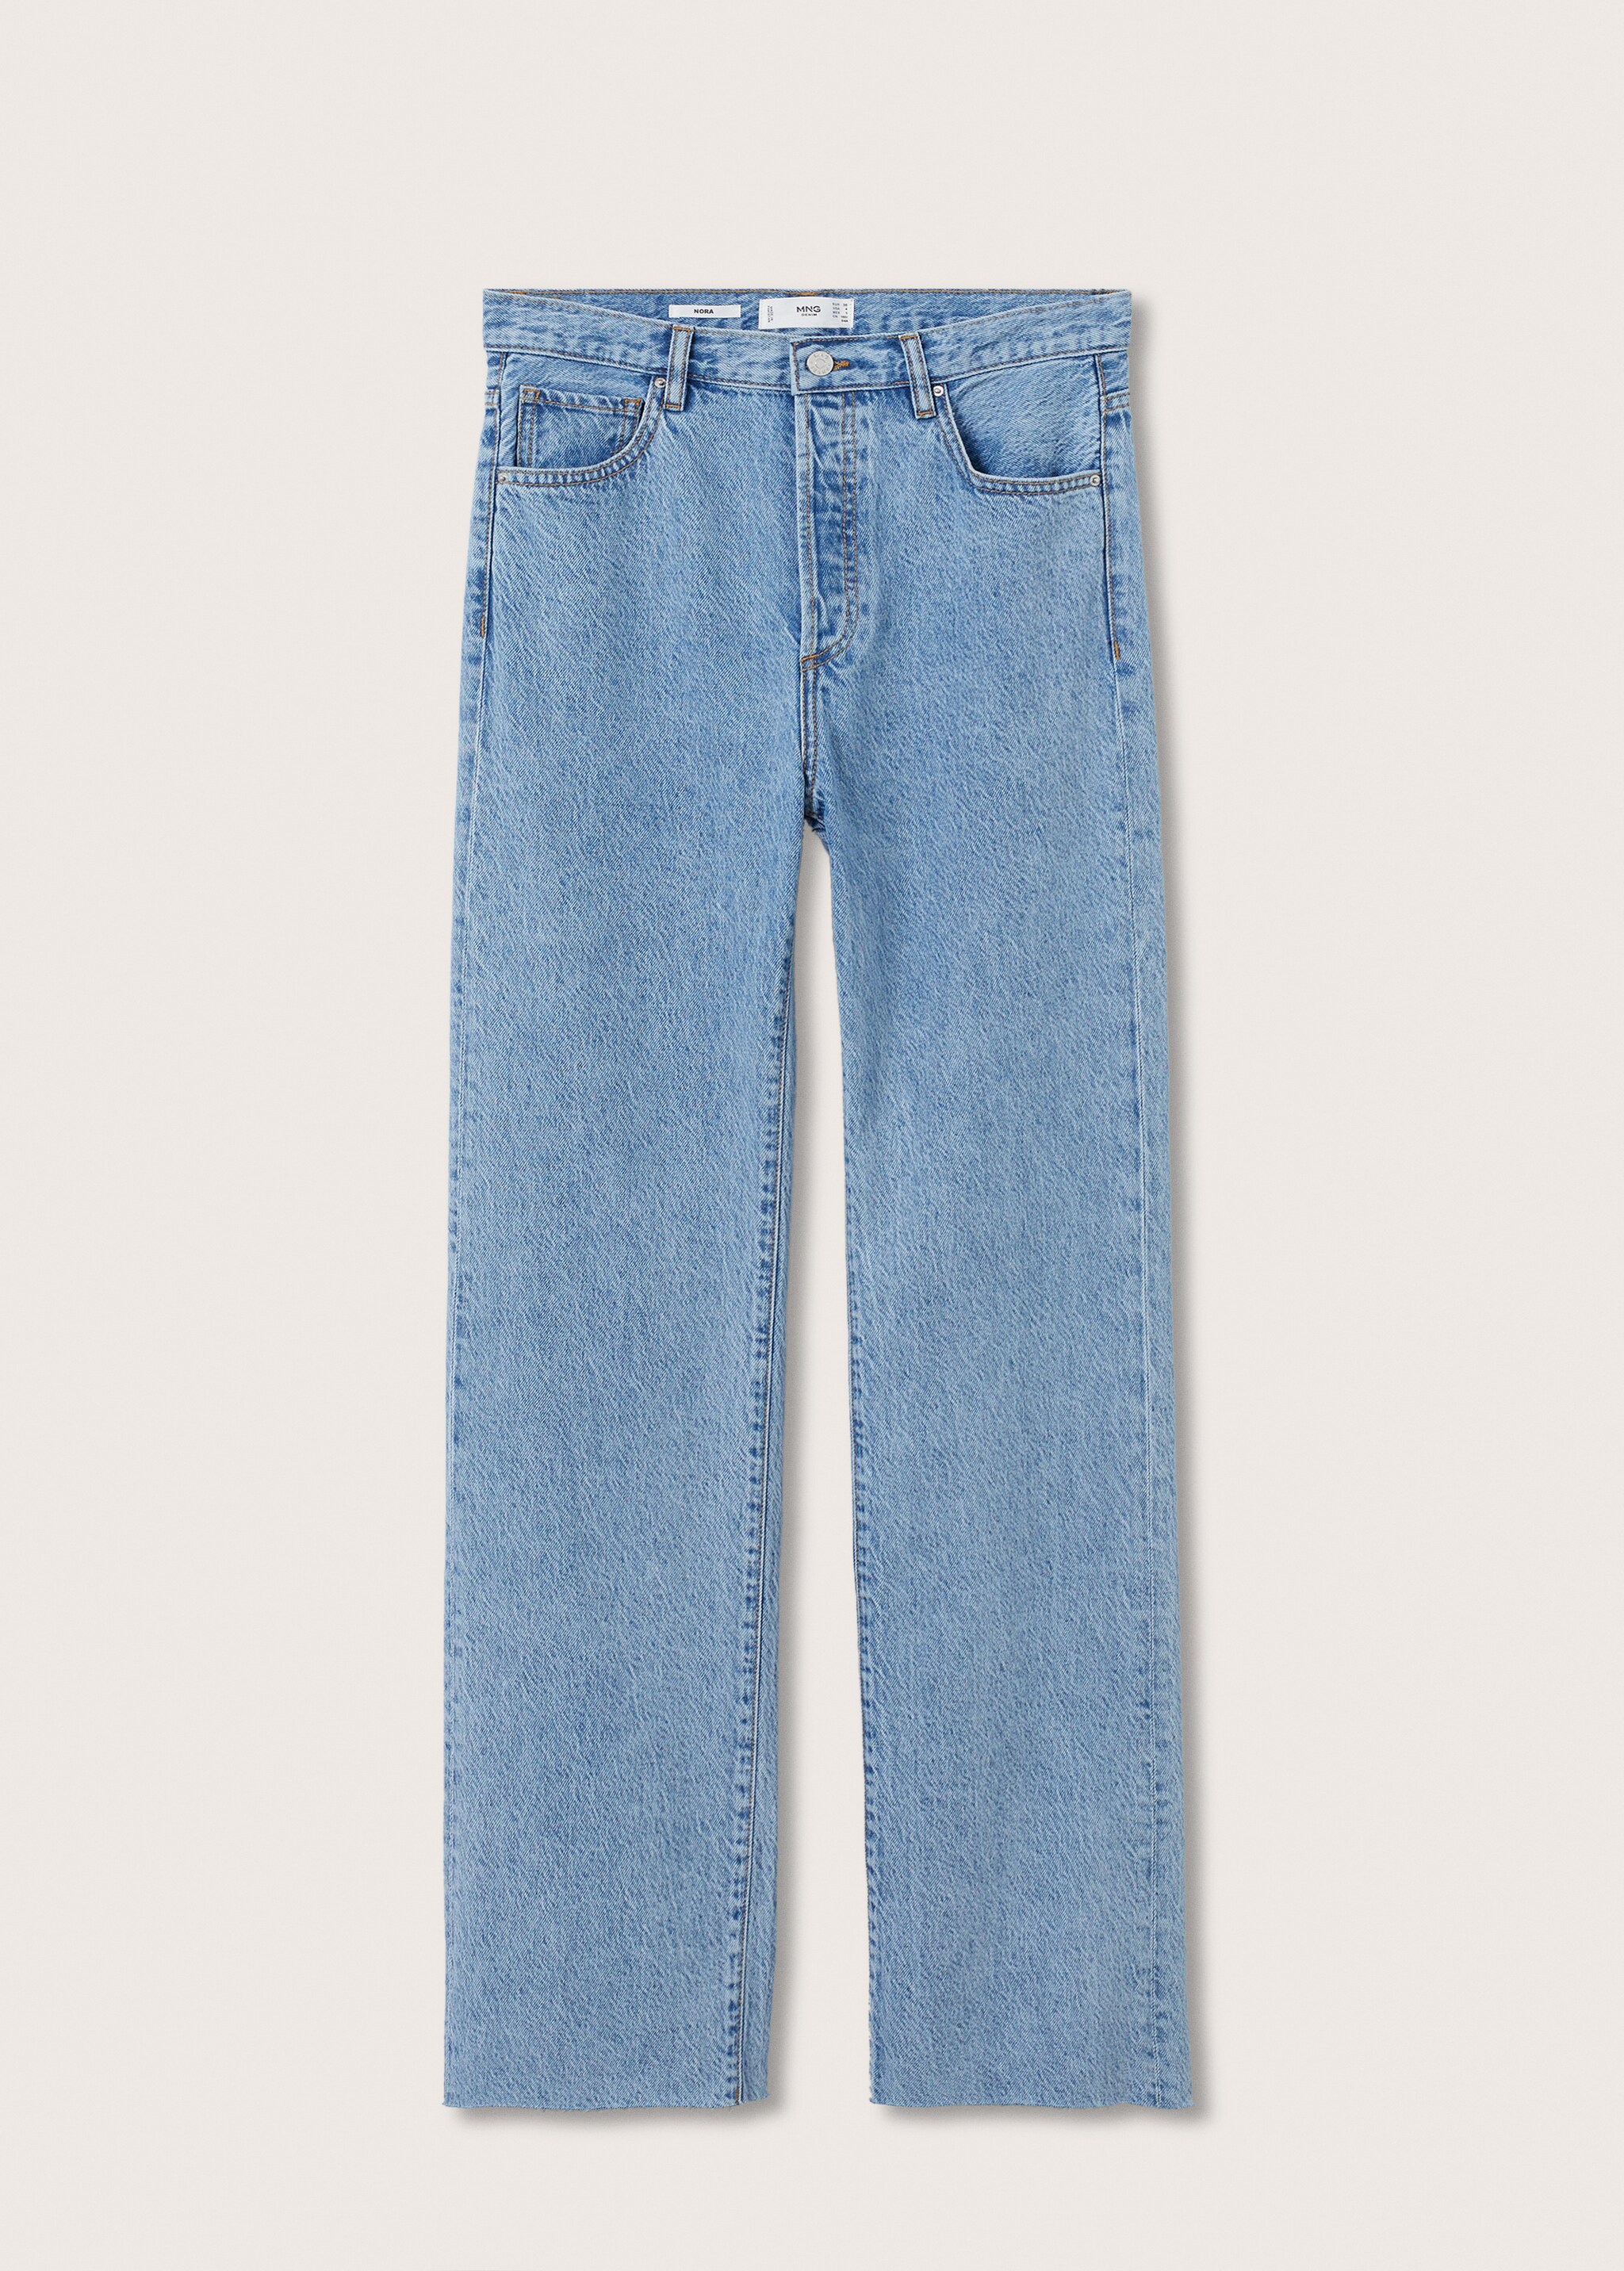 High-waist wideleg jeans - Article without model